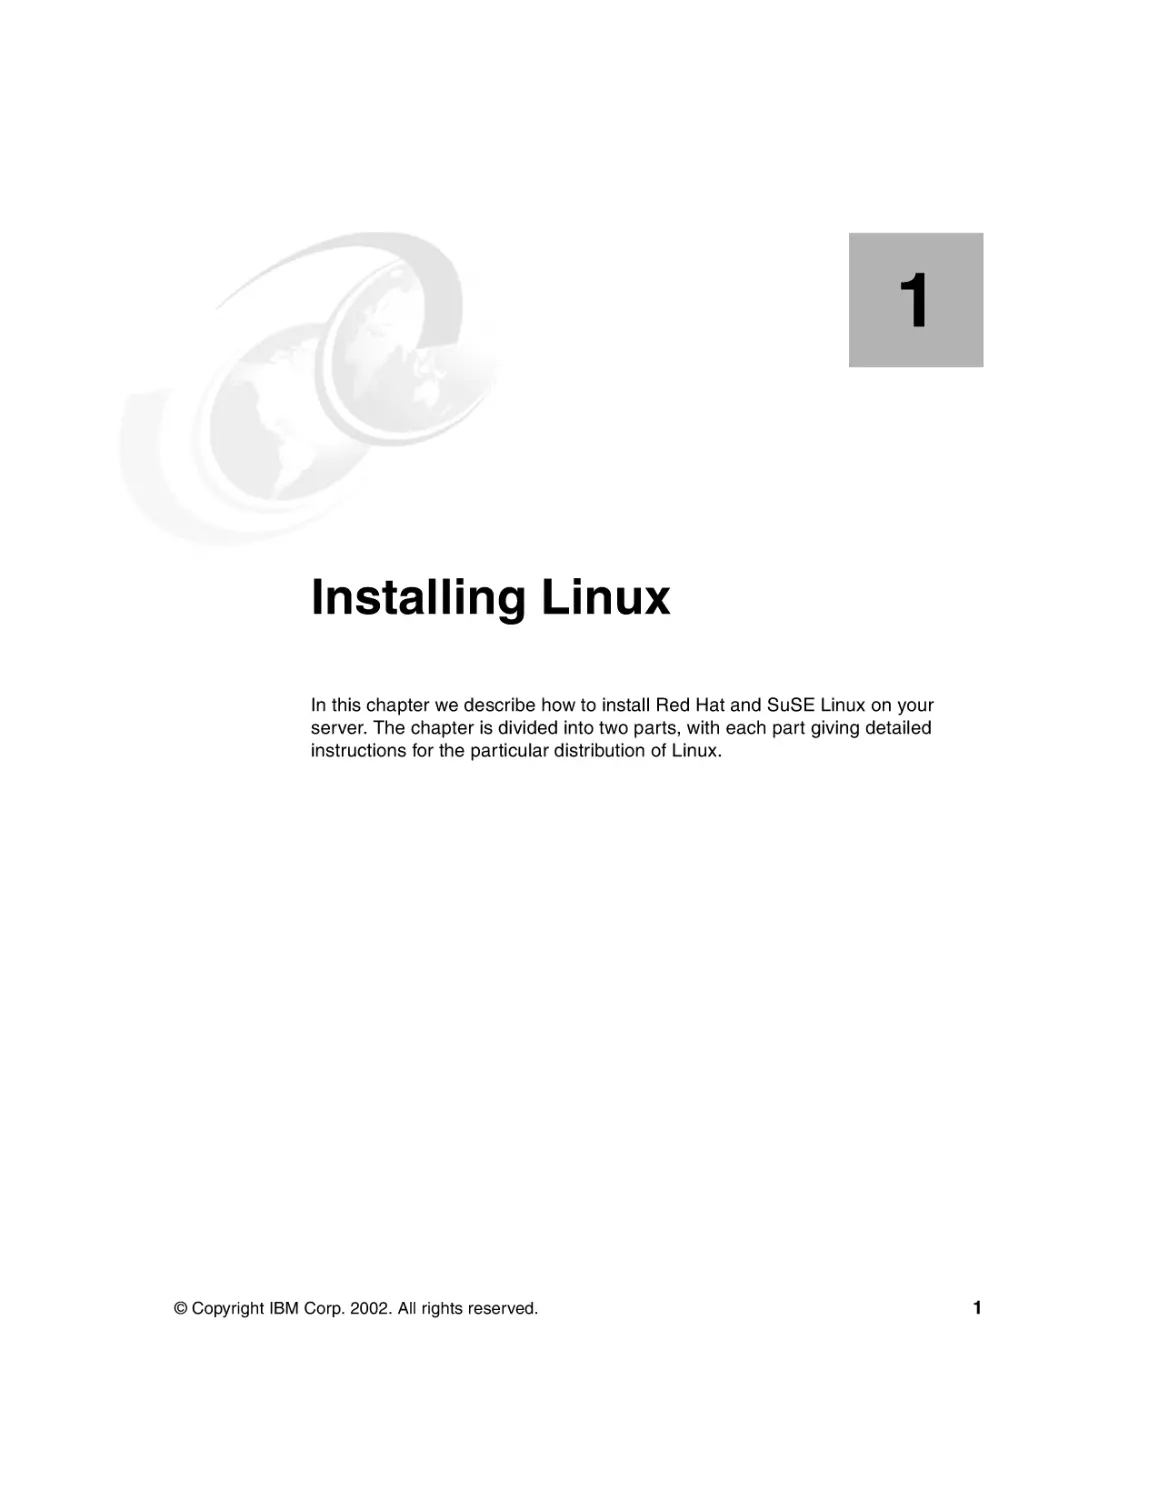 Chapter 1. Installing Linux